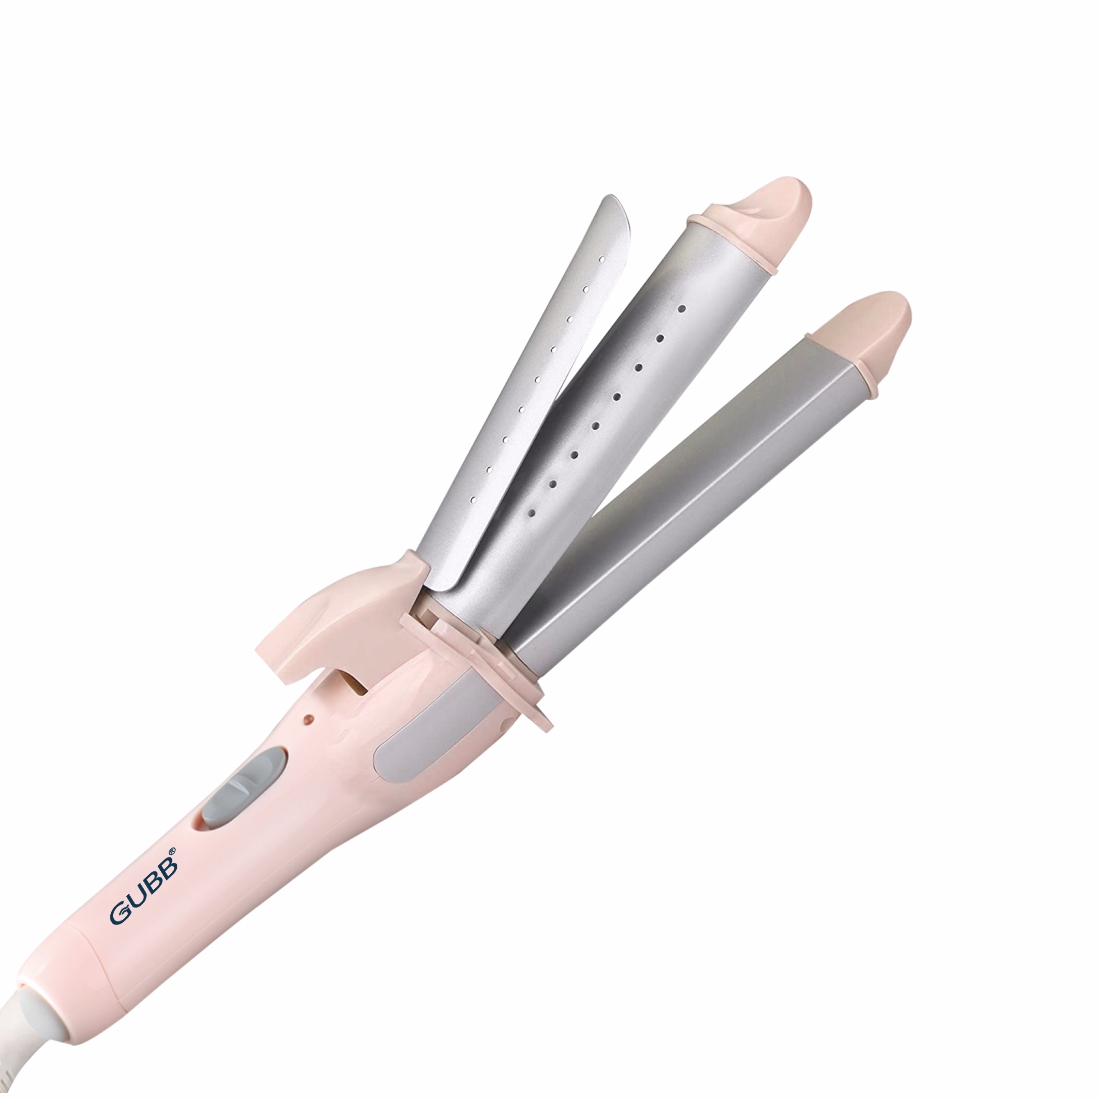 Buy 2 in 1 hair straightener and curler Online at the Best Price - Gubb